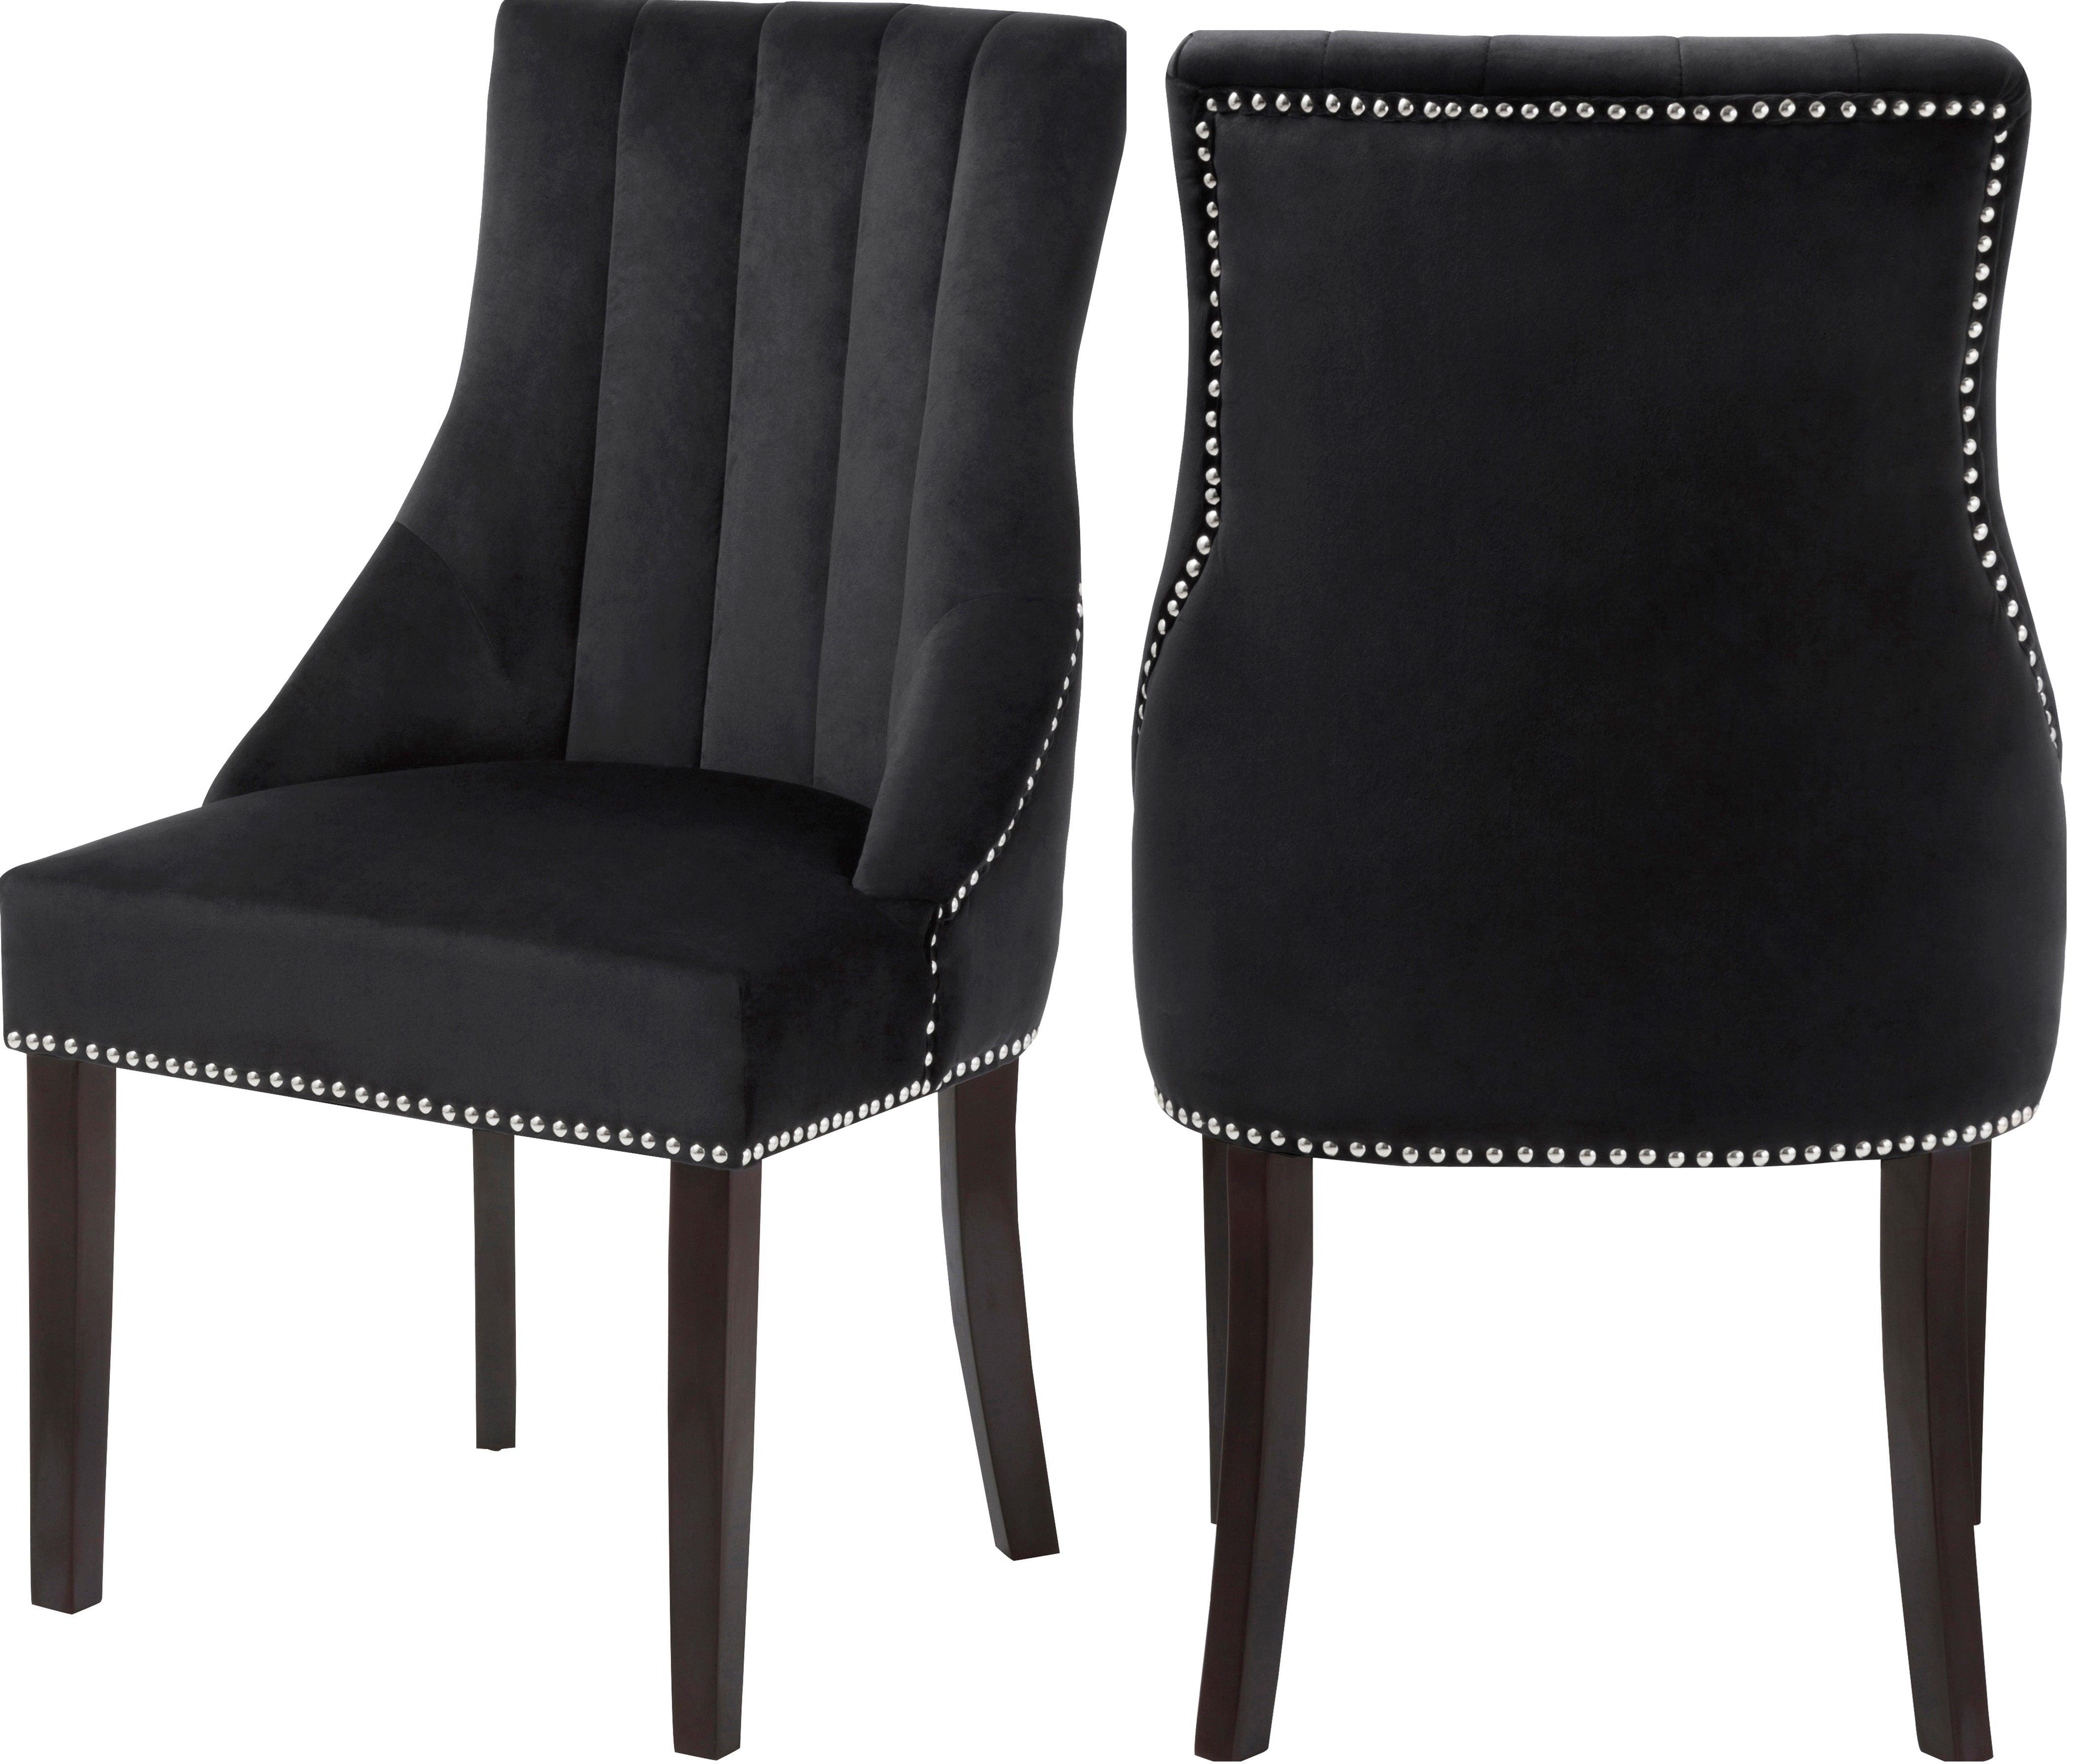 Meridian Furniture - Oxford - Dining Chair (Set of 2) - 5th Avenue Furniture